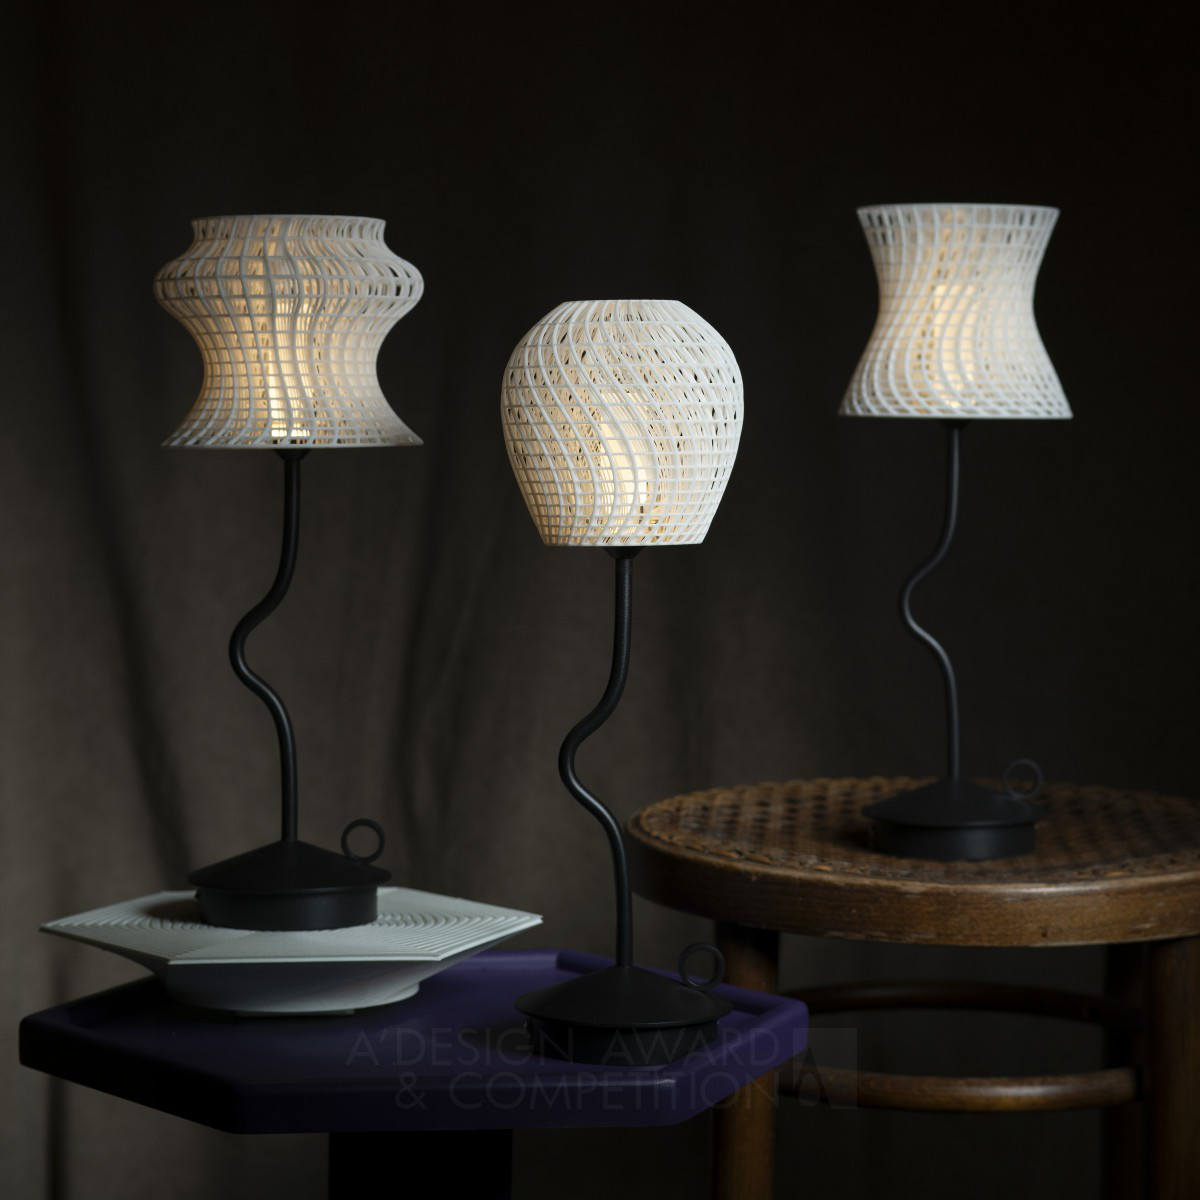 Quintessence Spectrum Series Portable Table Lamp by Jeffrey Geiringer Bronze 3D Printed Forms and Products Design Award Winner 2024 